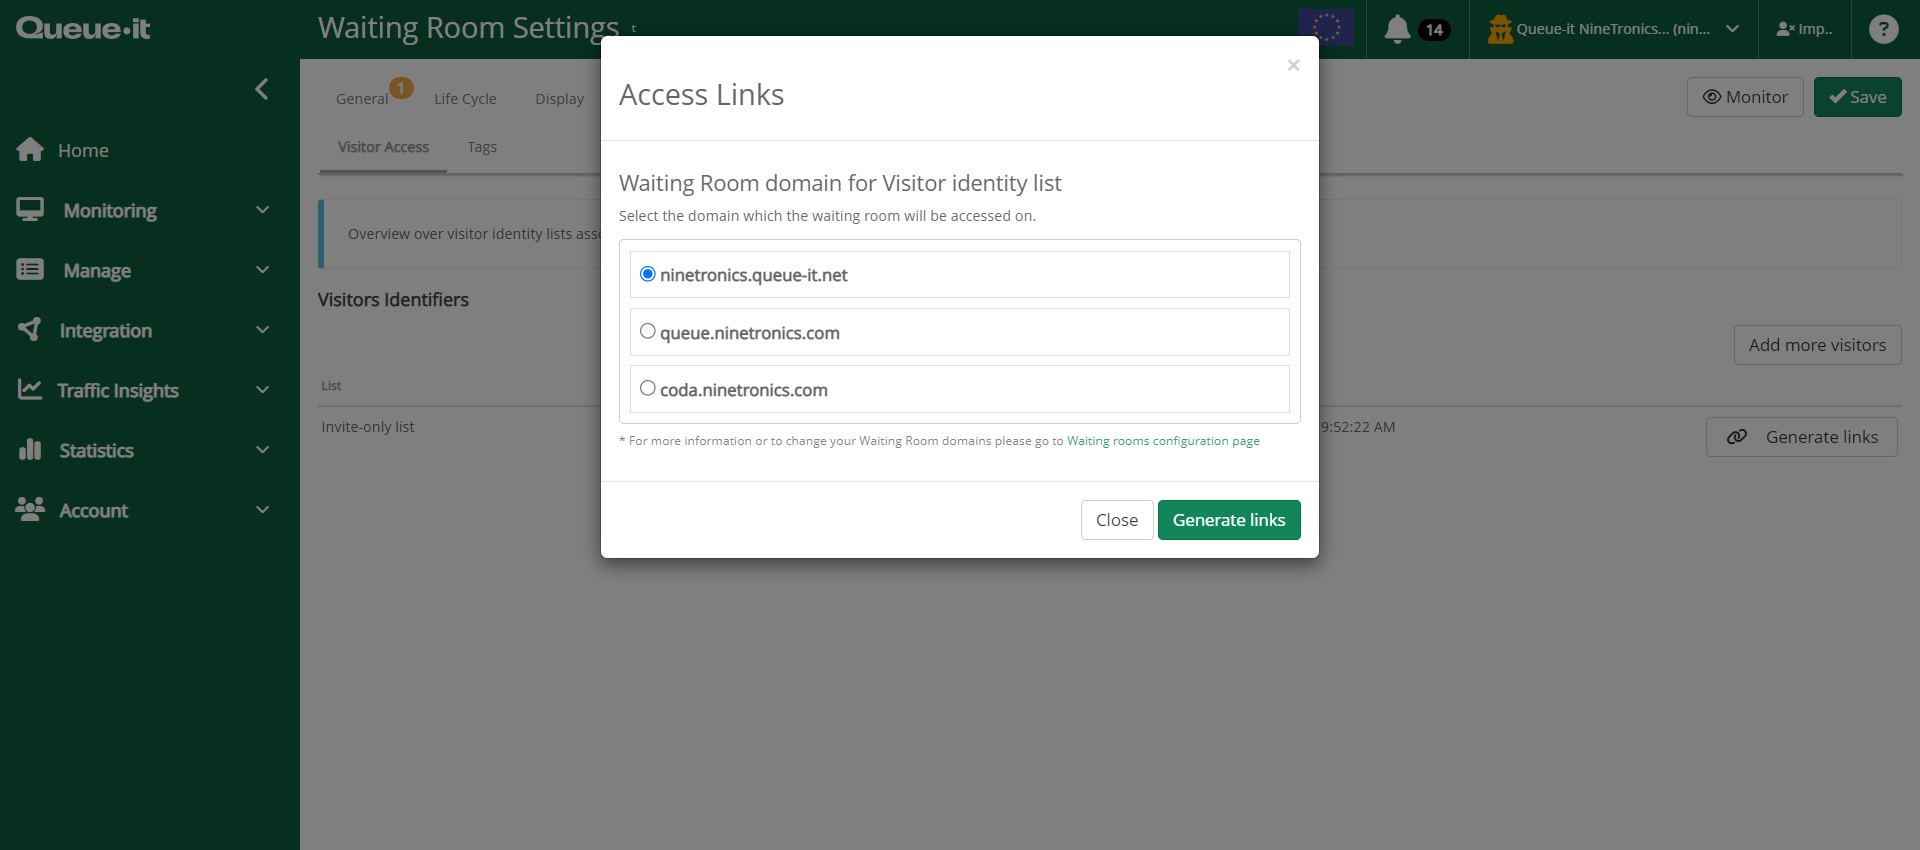 Select domain name to generate links for invite-only waiting room